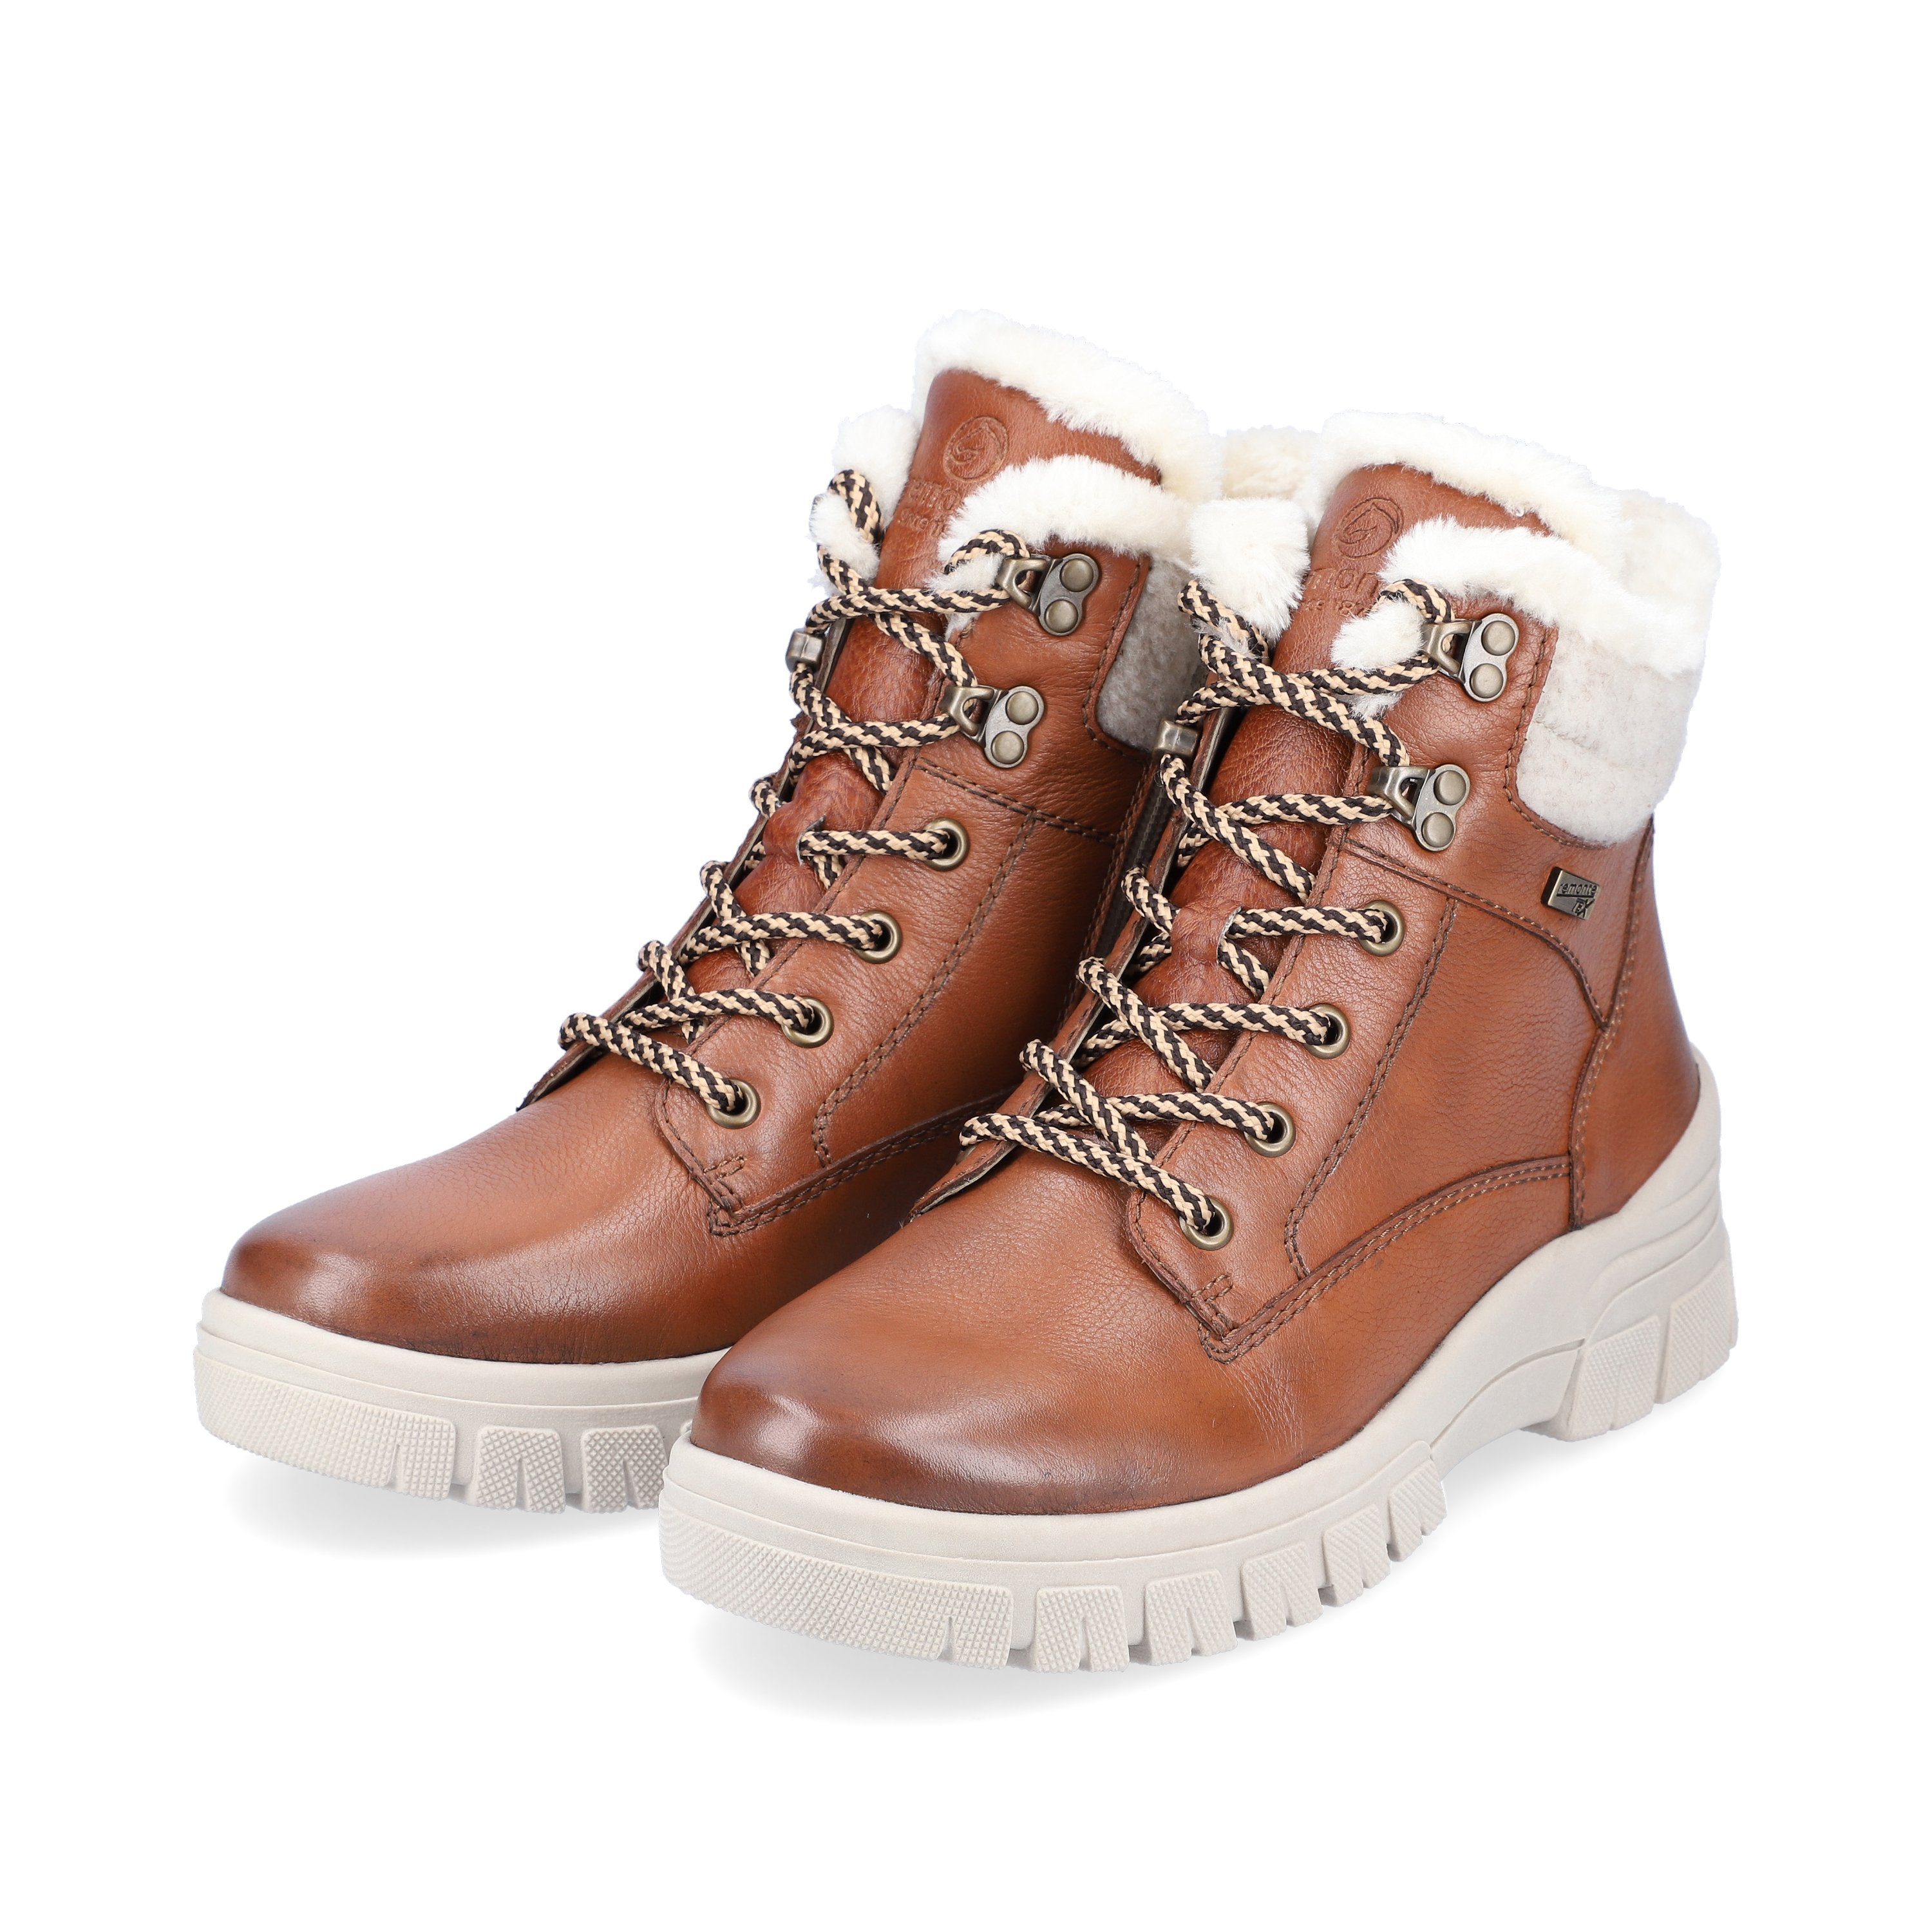 Brown remonte women´s lace-up boots D0E71-24 with light profile sole. Shoe laterally